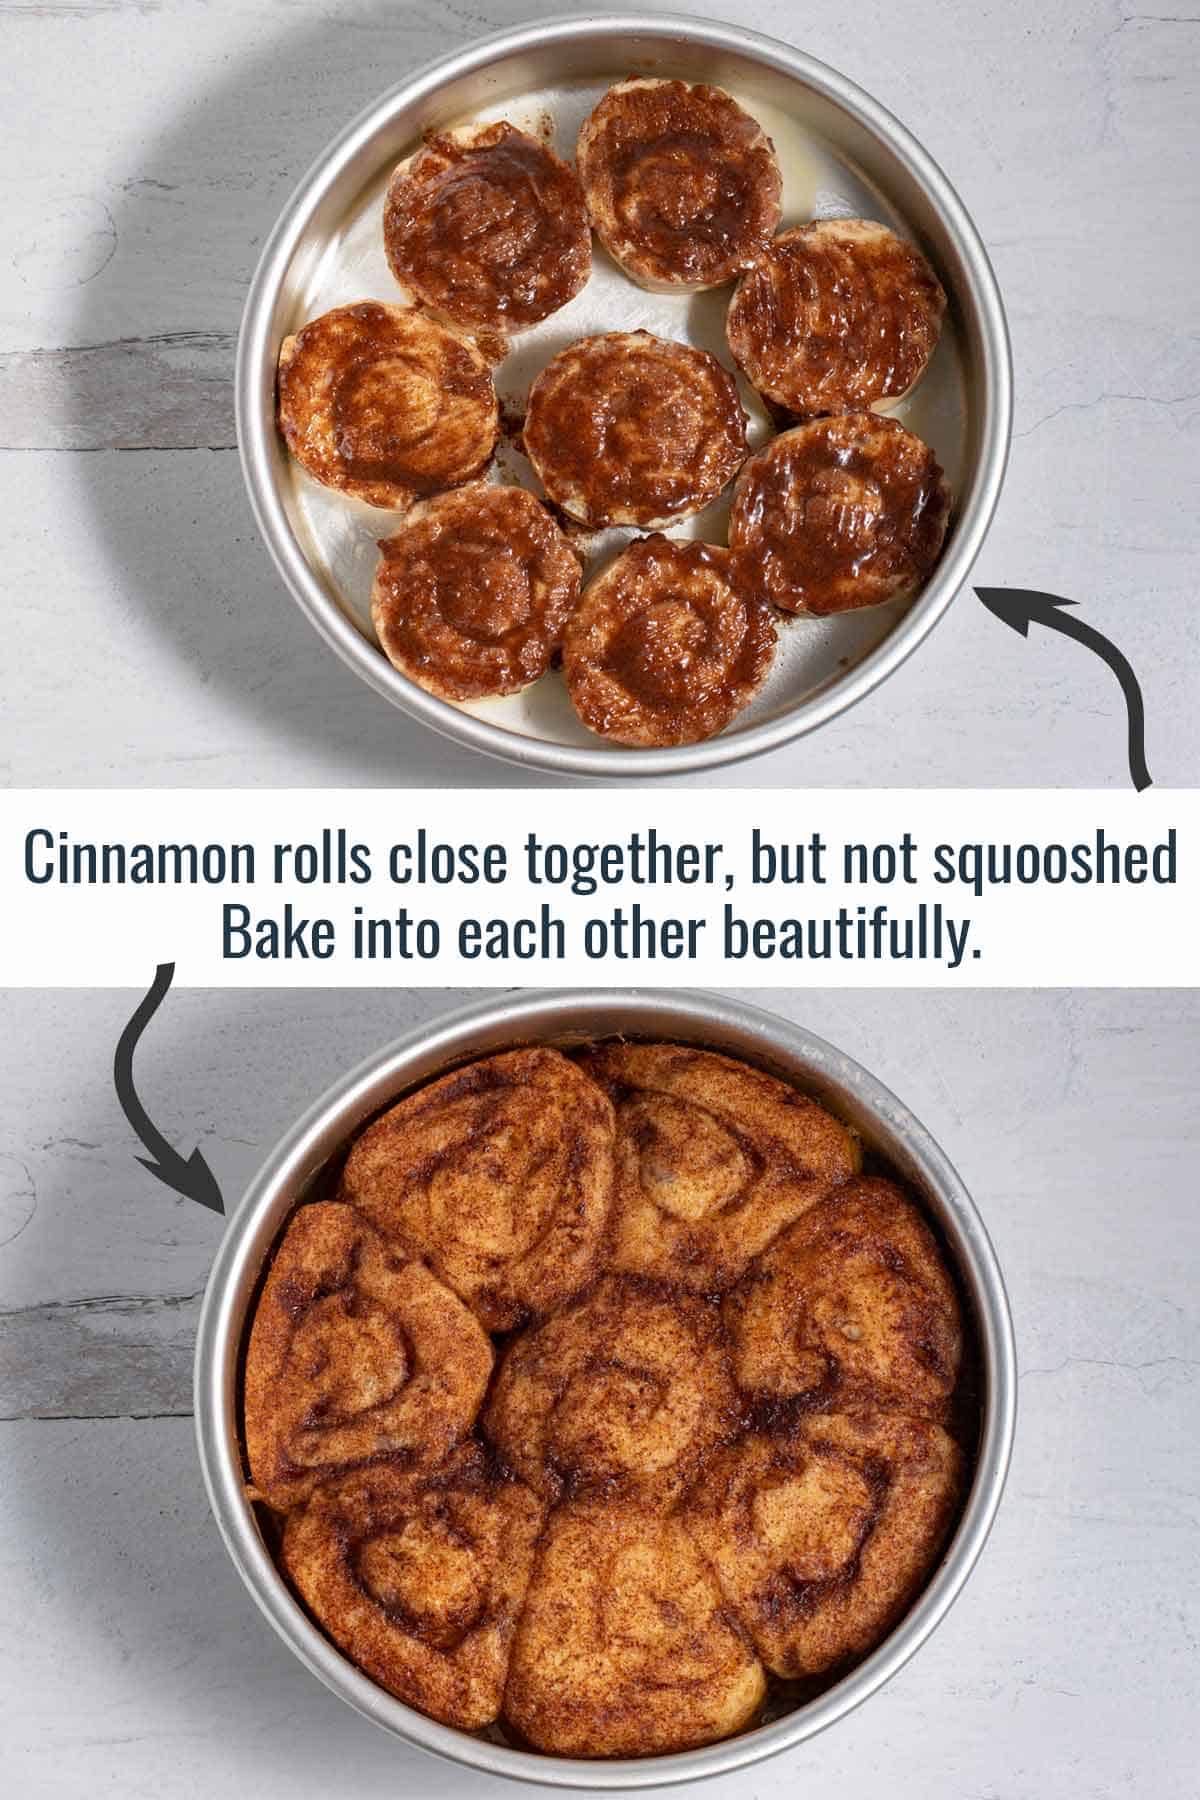 Cinnamon rolls in a round cake pan with enough space to not be squooshed when baking.